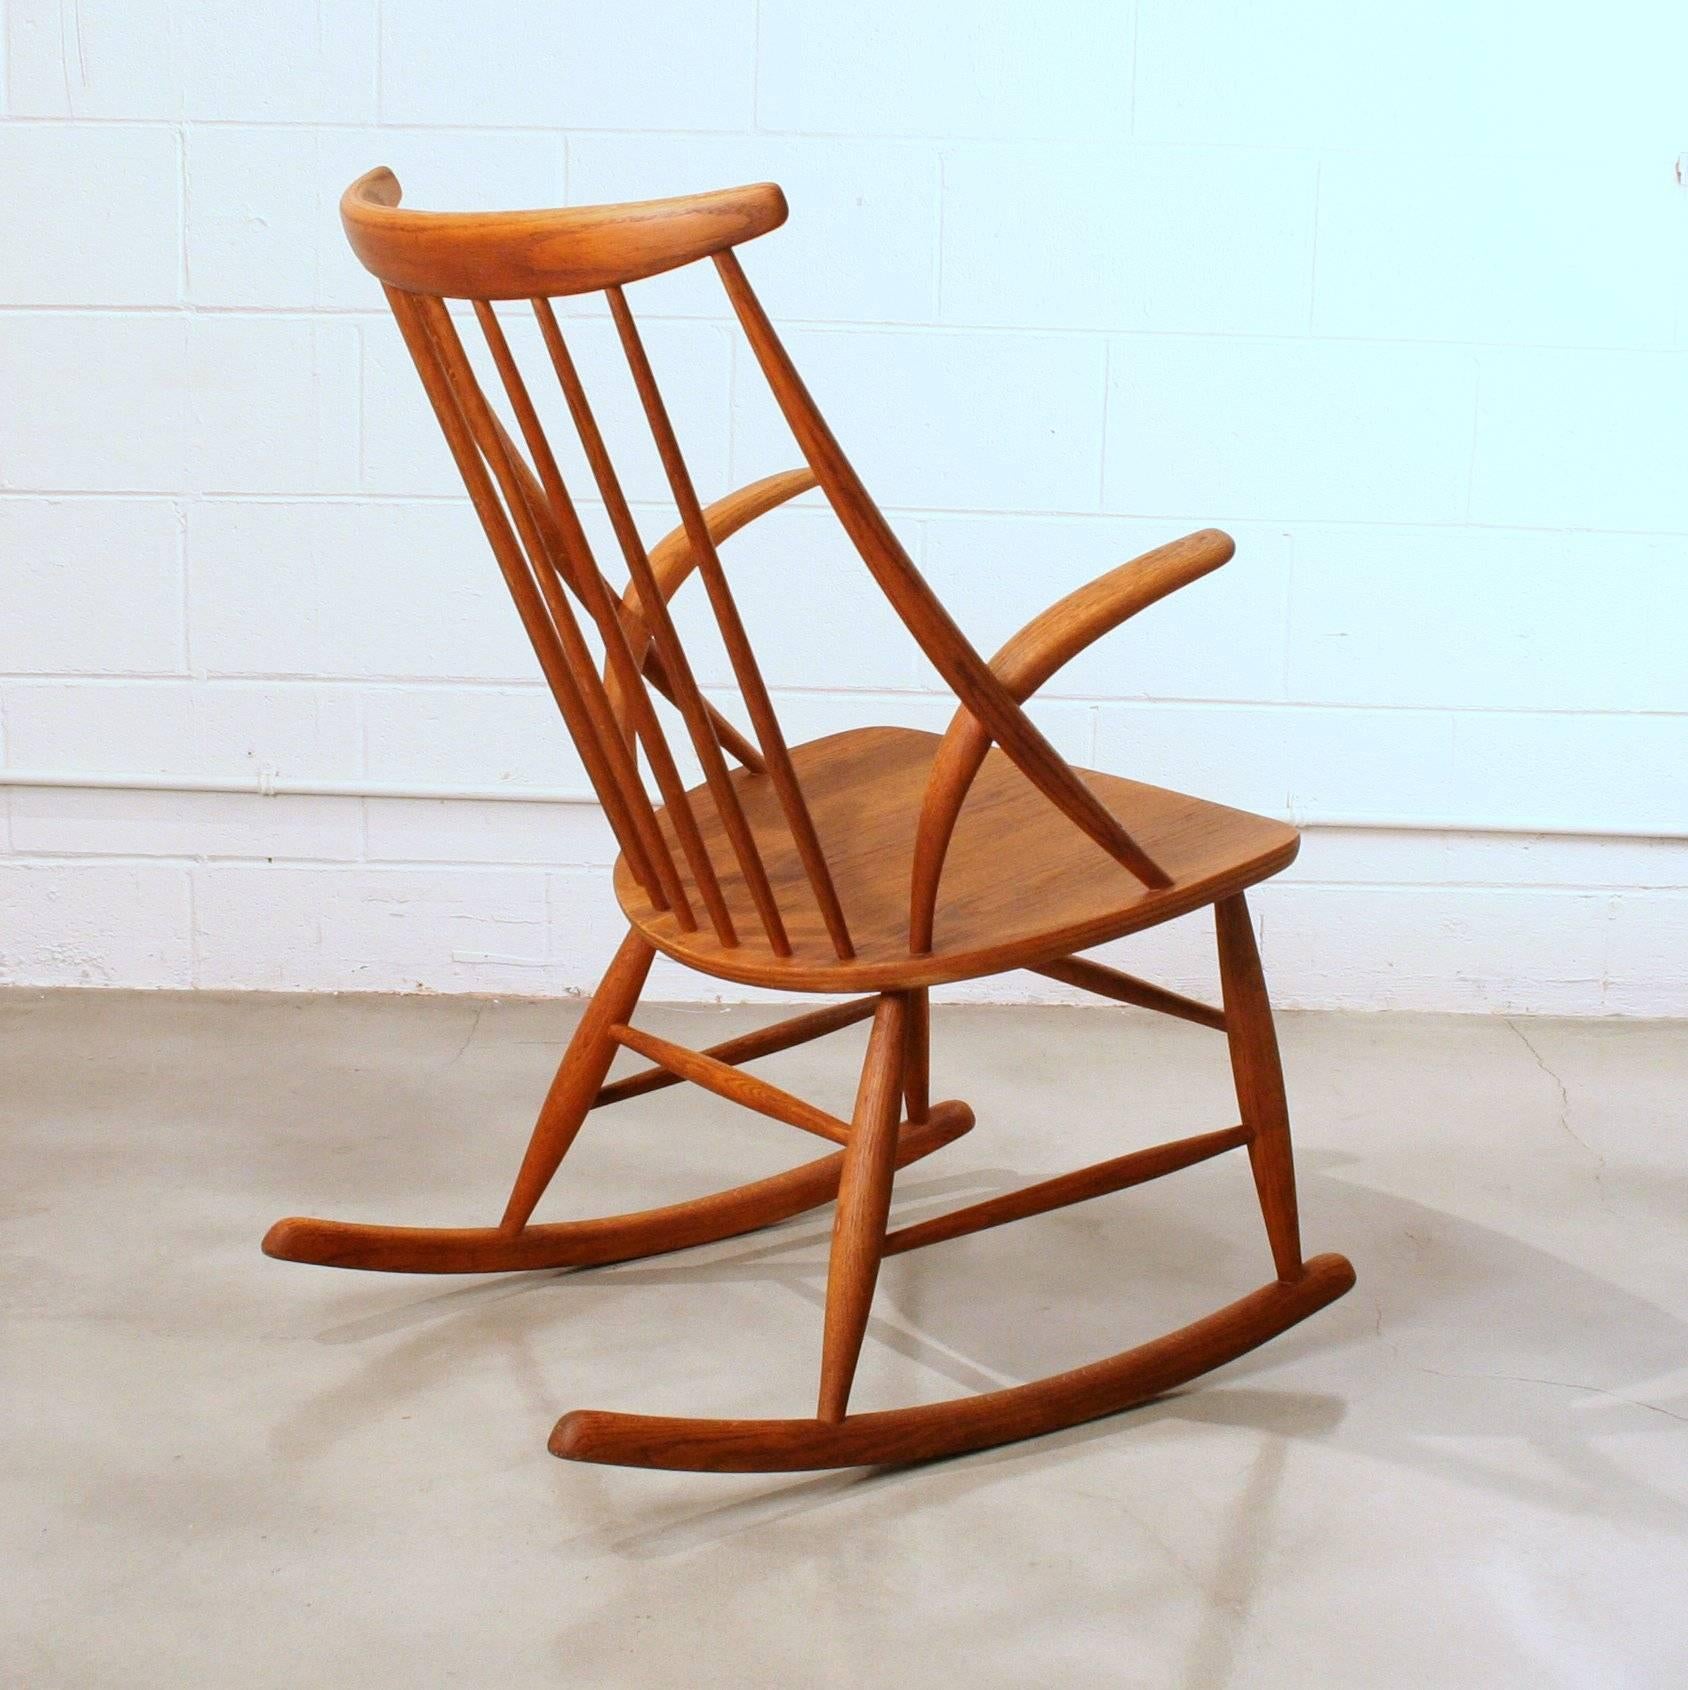 Vintage oak rocking chair featuring wonderful lines and beautiful graining throughout. This would be a fantastic addition to any Mid-Century inspired space. Made in Denmark.